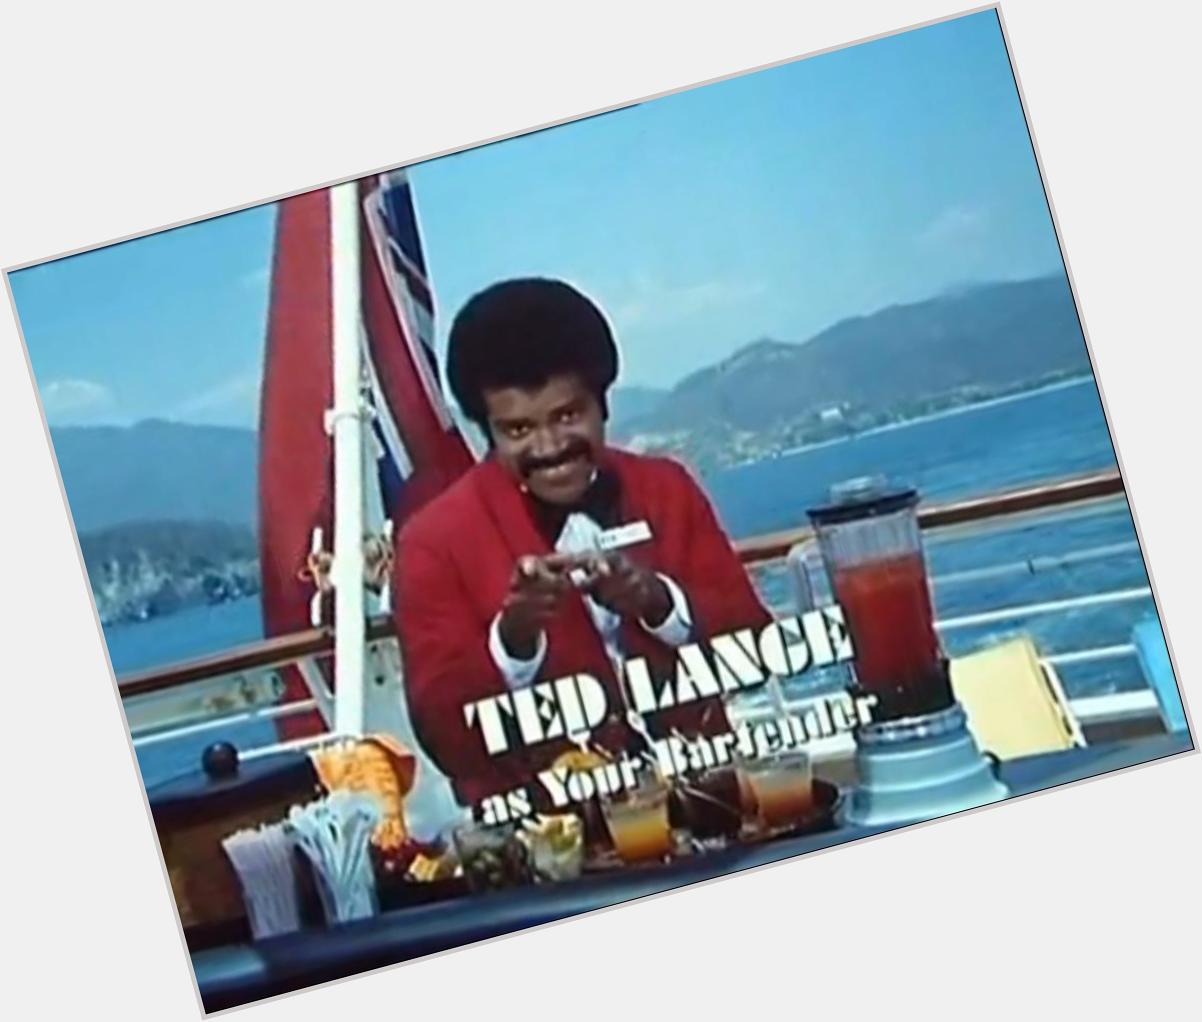 Happy Birthday to Ted Lange! Back atcha, brother! 